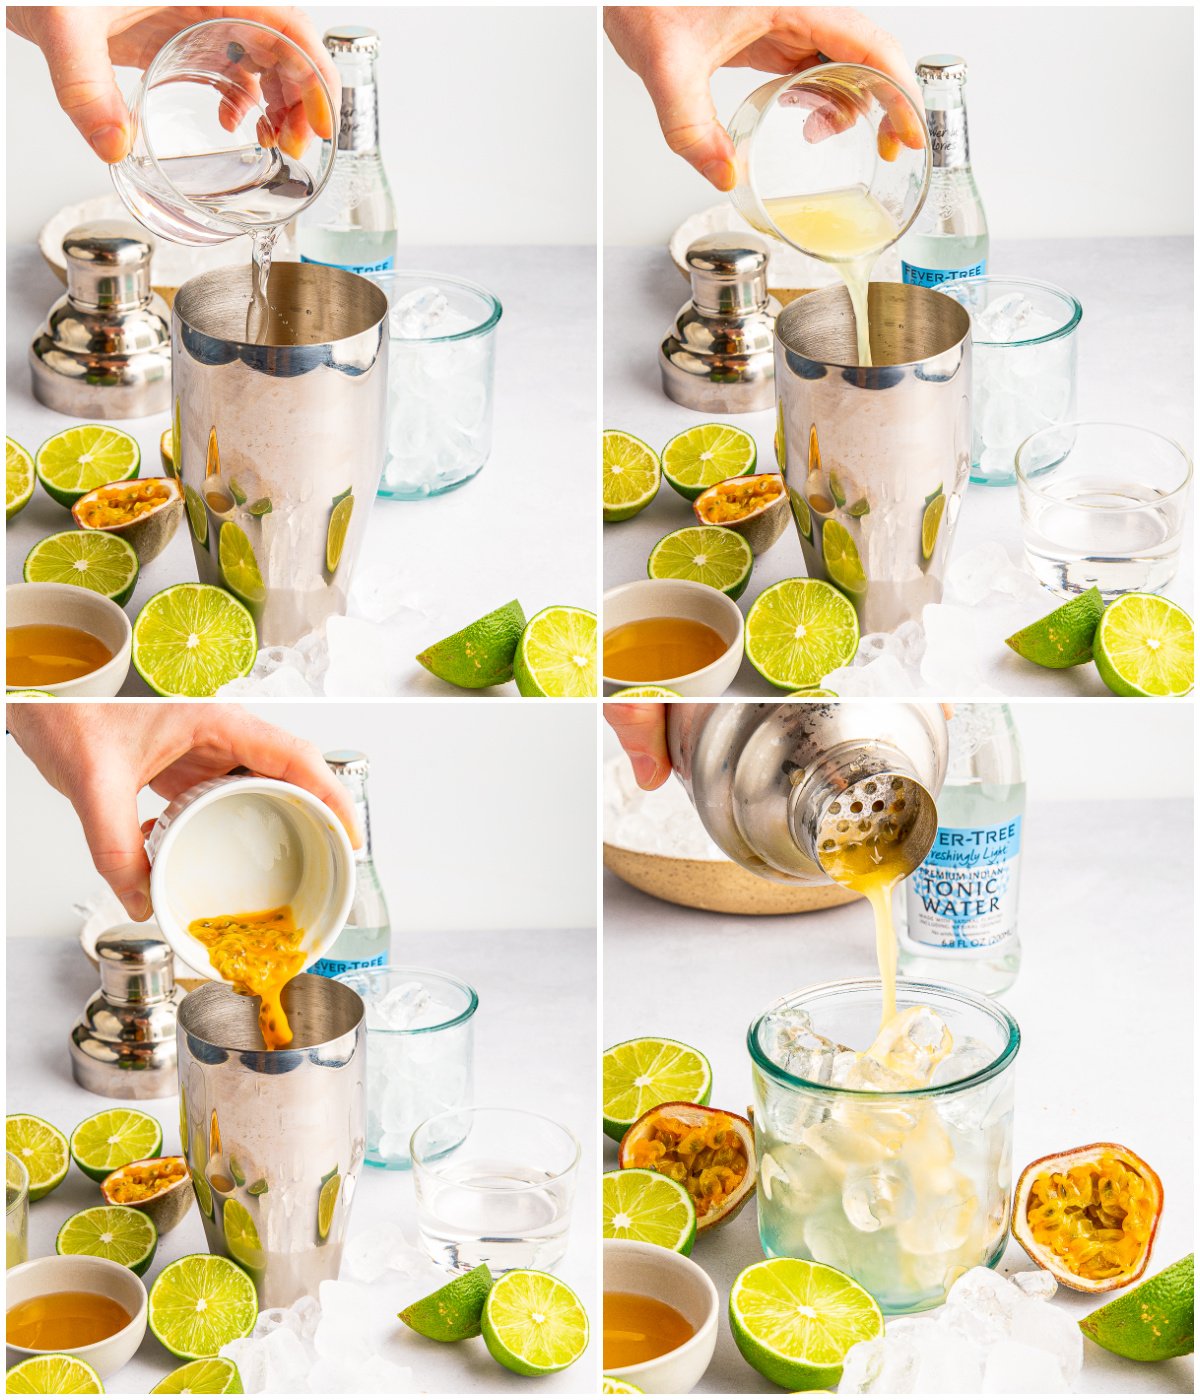 Step by step photos on how to make a Passion Fruit Gin Fizz.